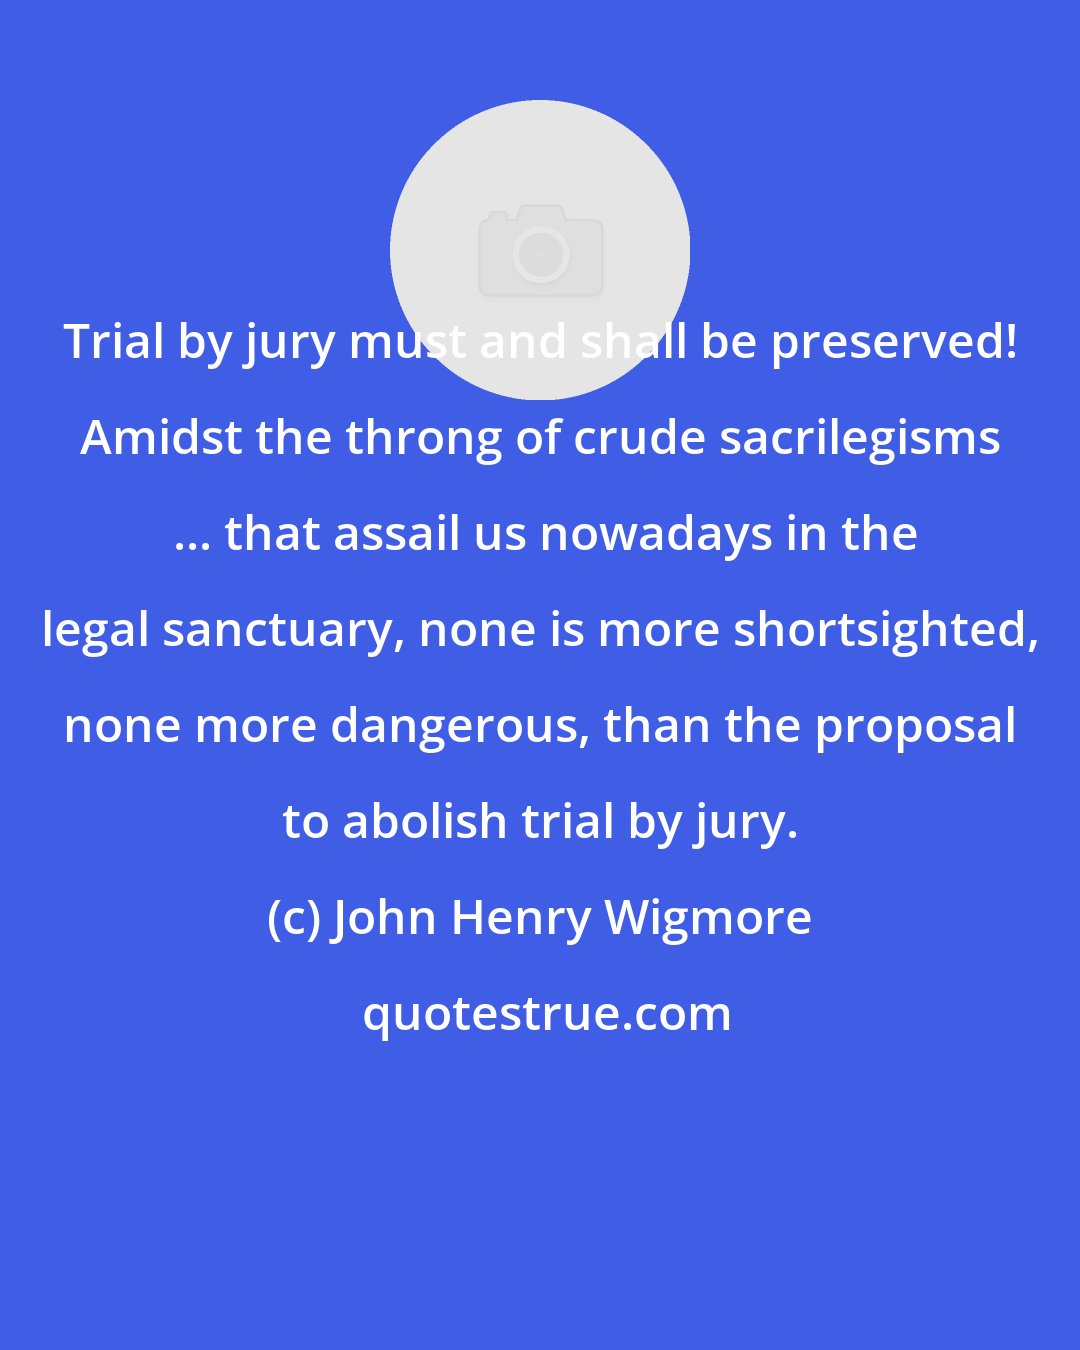 John Henry Wigmore: Trial by jury must and shall be preserved! Amidst the throng of crude sacrilegisms  ... that assail us nowadays in the legal sanctuary, none is more shortsighted, none more dangerous, than the proposal to abolish trial by jury.